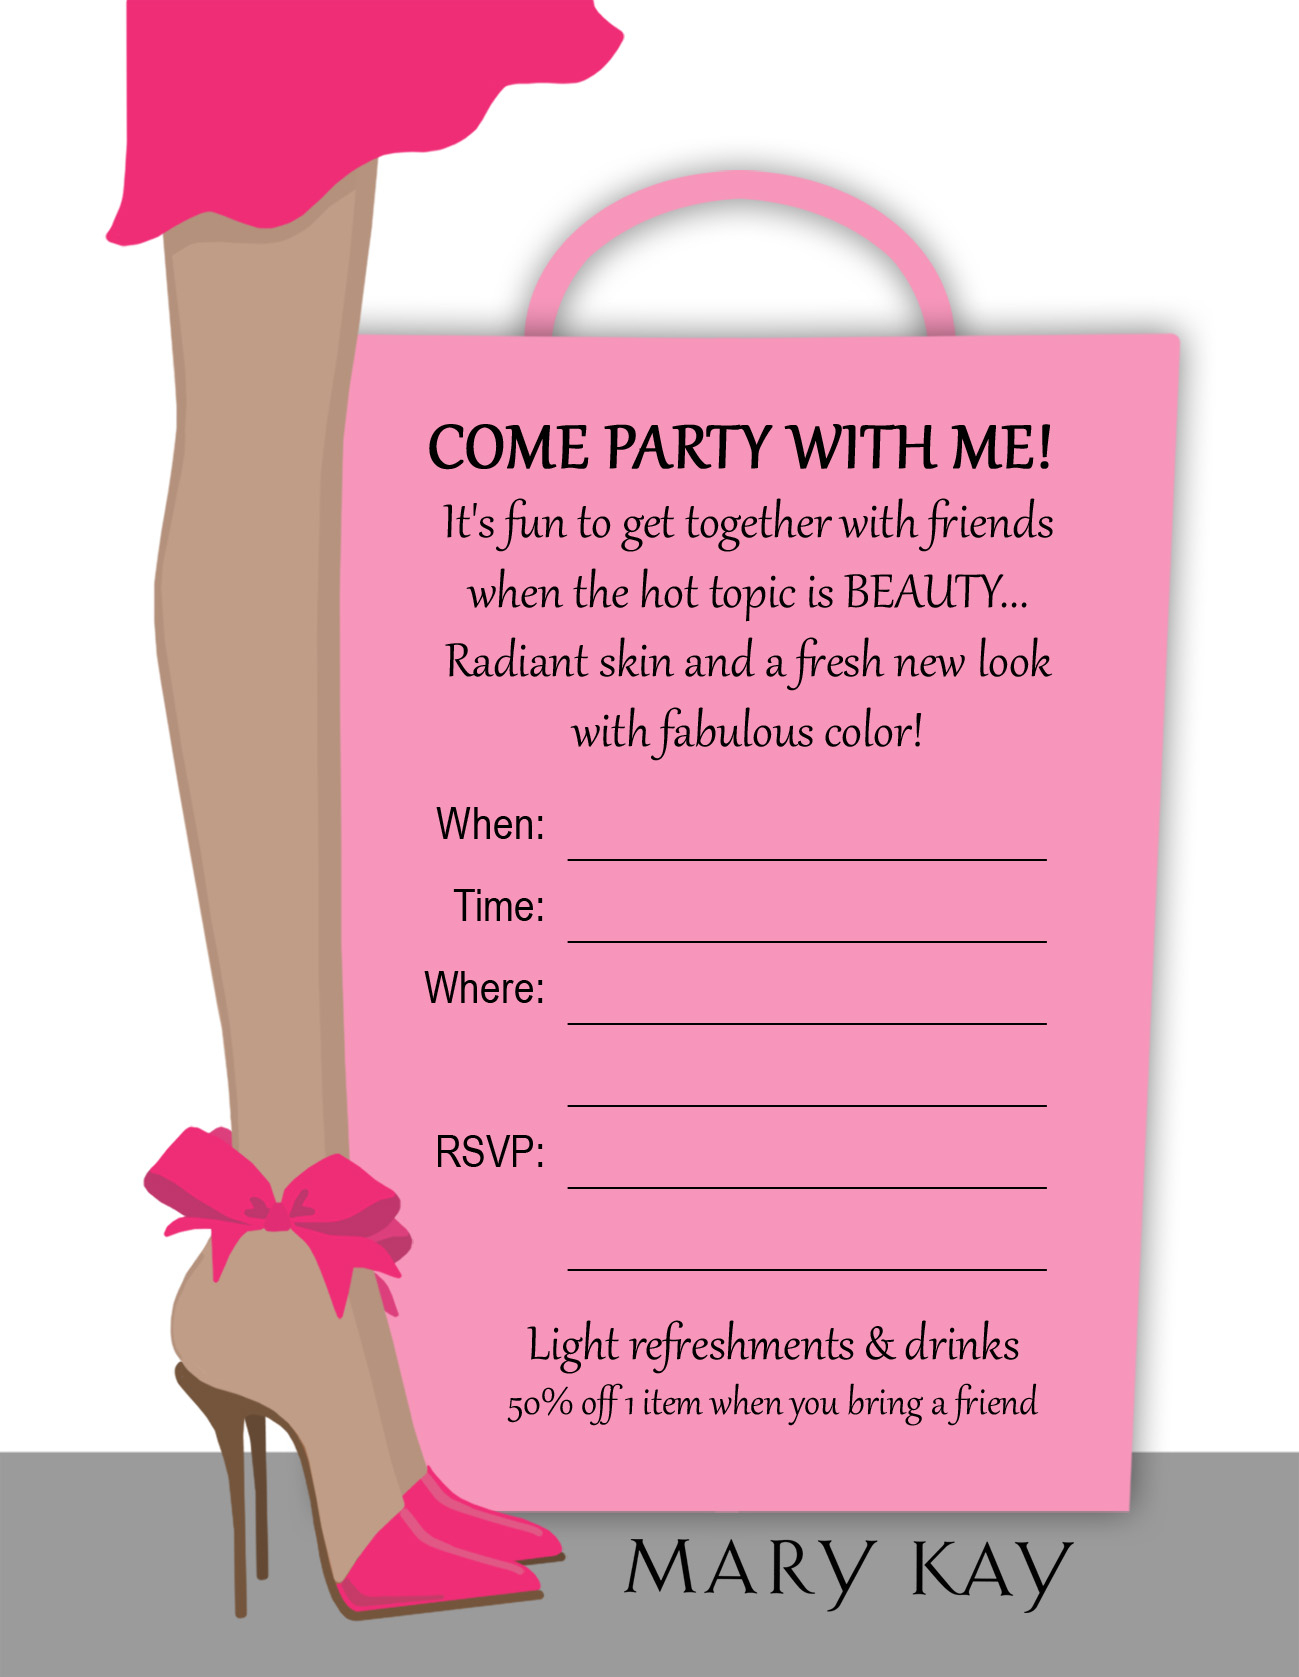 9 Best Photos Of Skin Care Mary Kay Party Flyer – Mary Kay For Mary Kay Flyer Templates Free